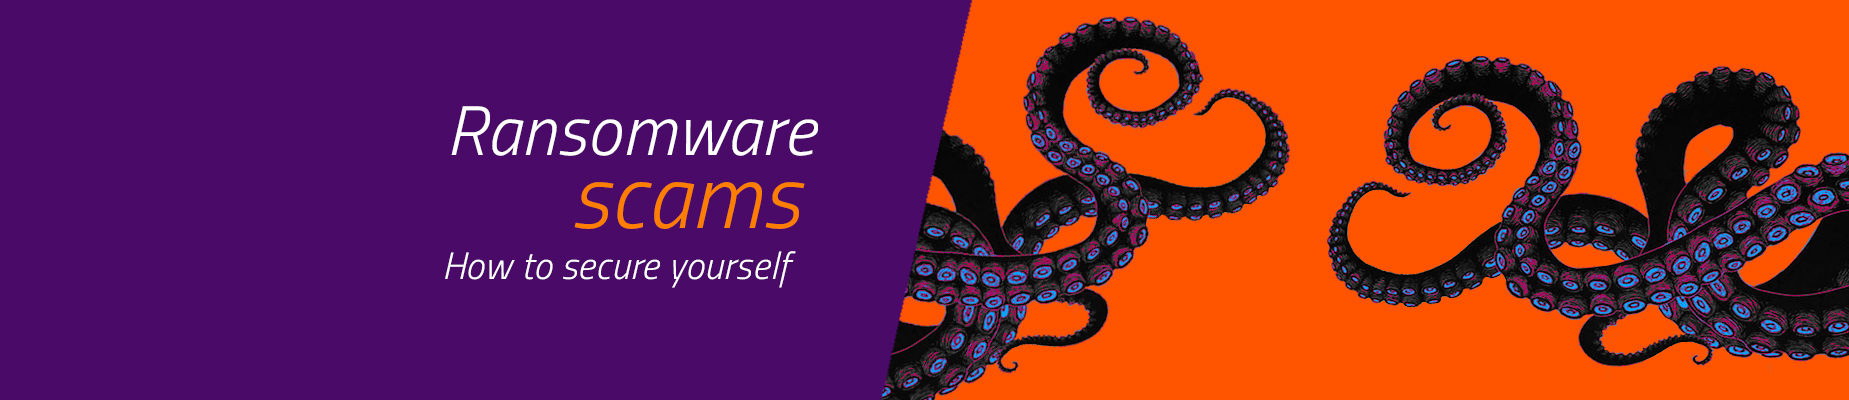 Ransomware scams – How to secure yourself